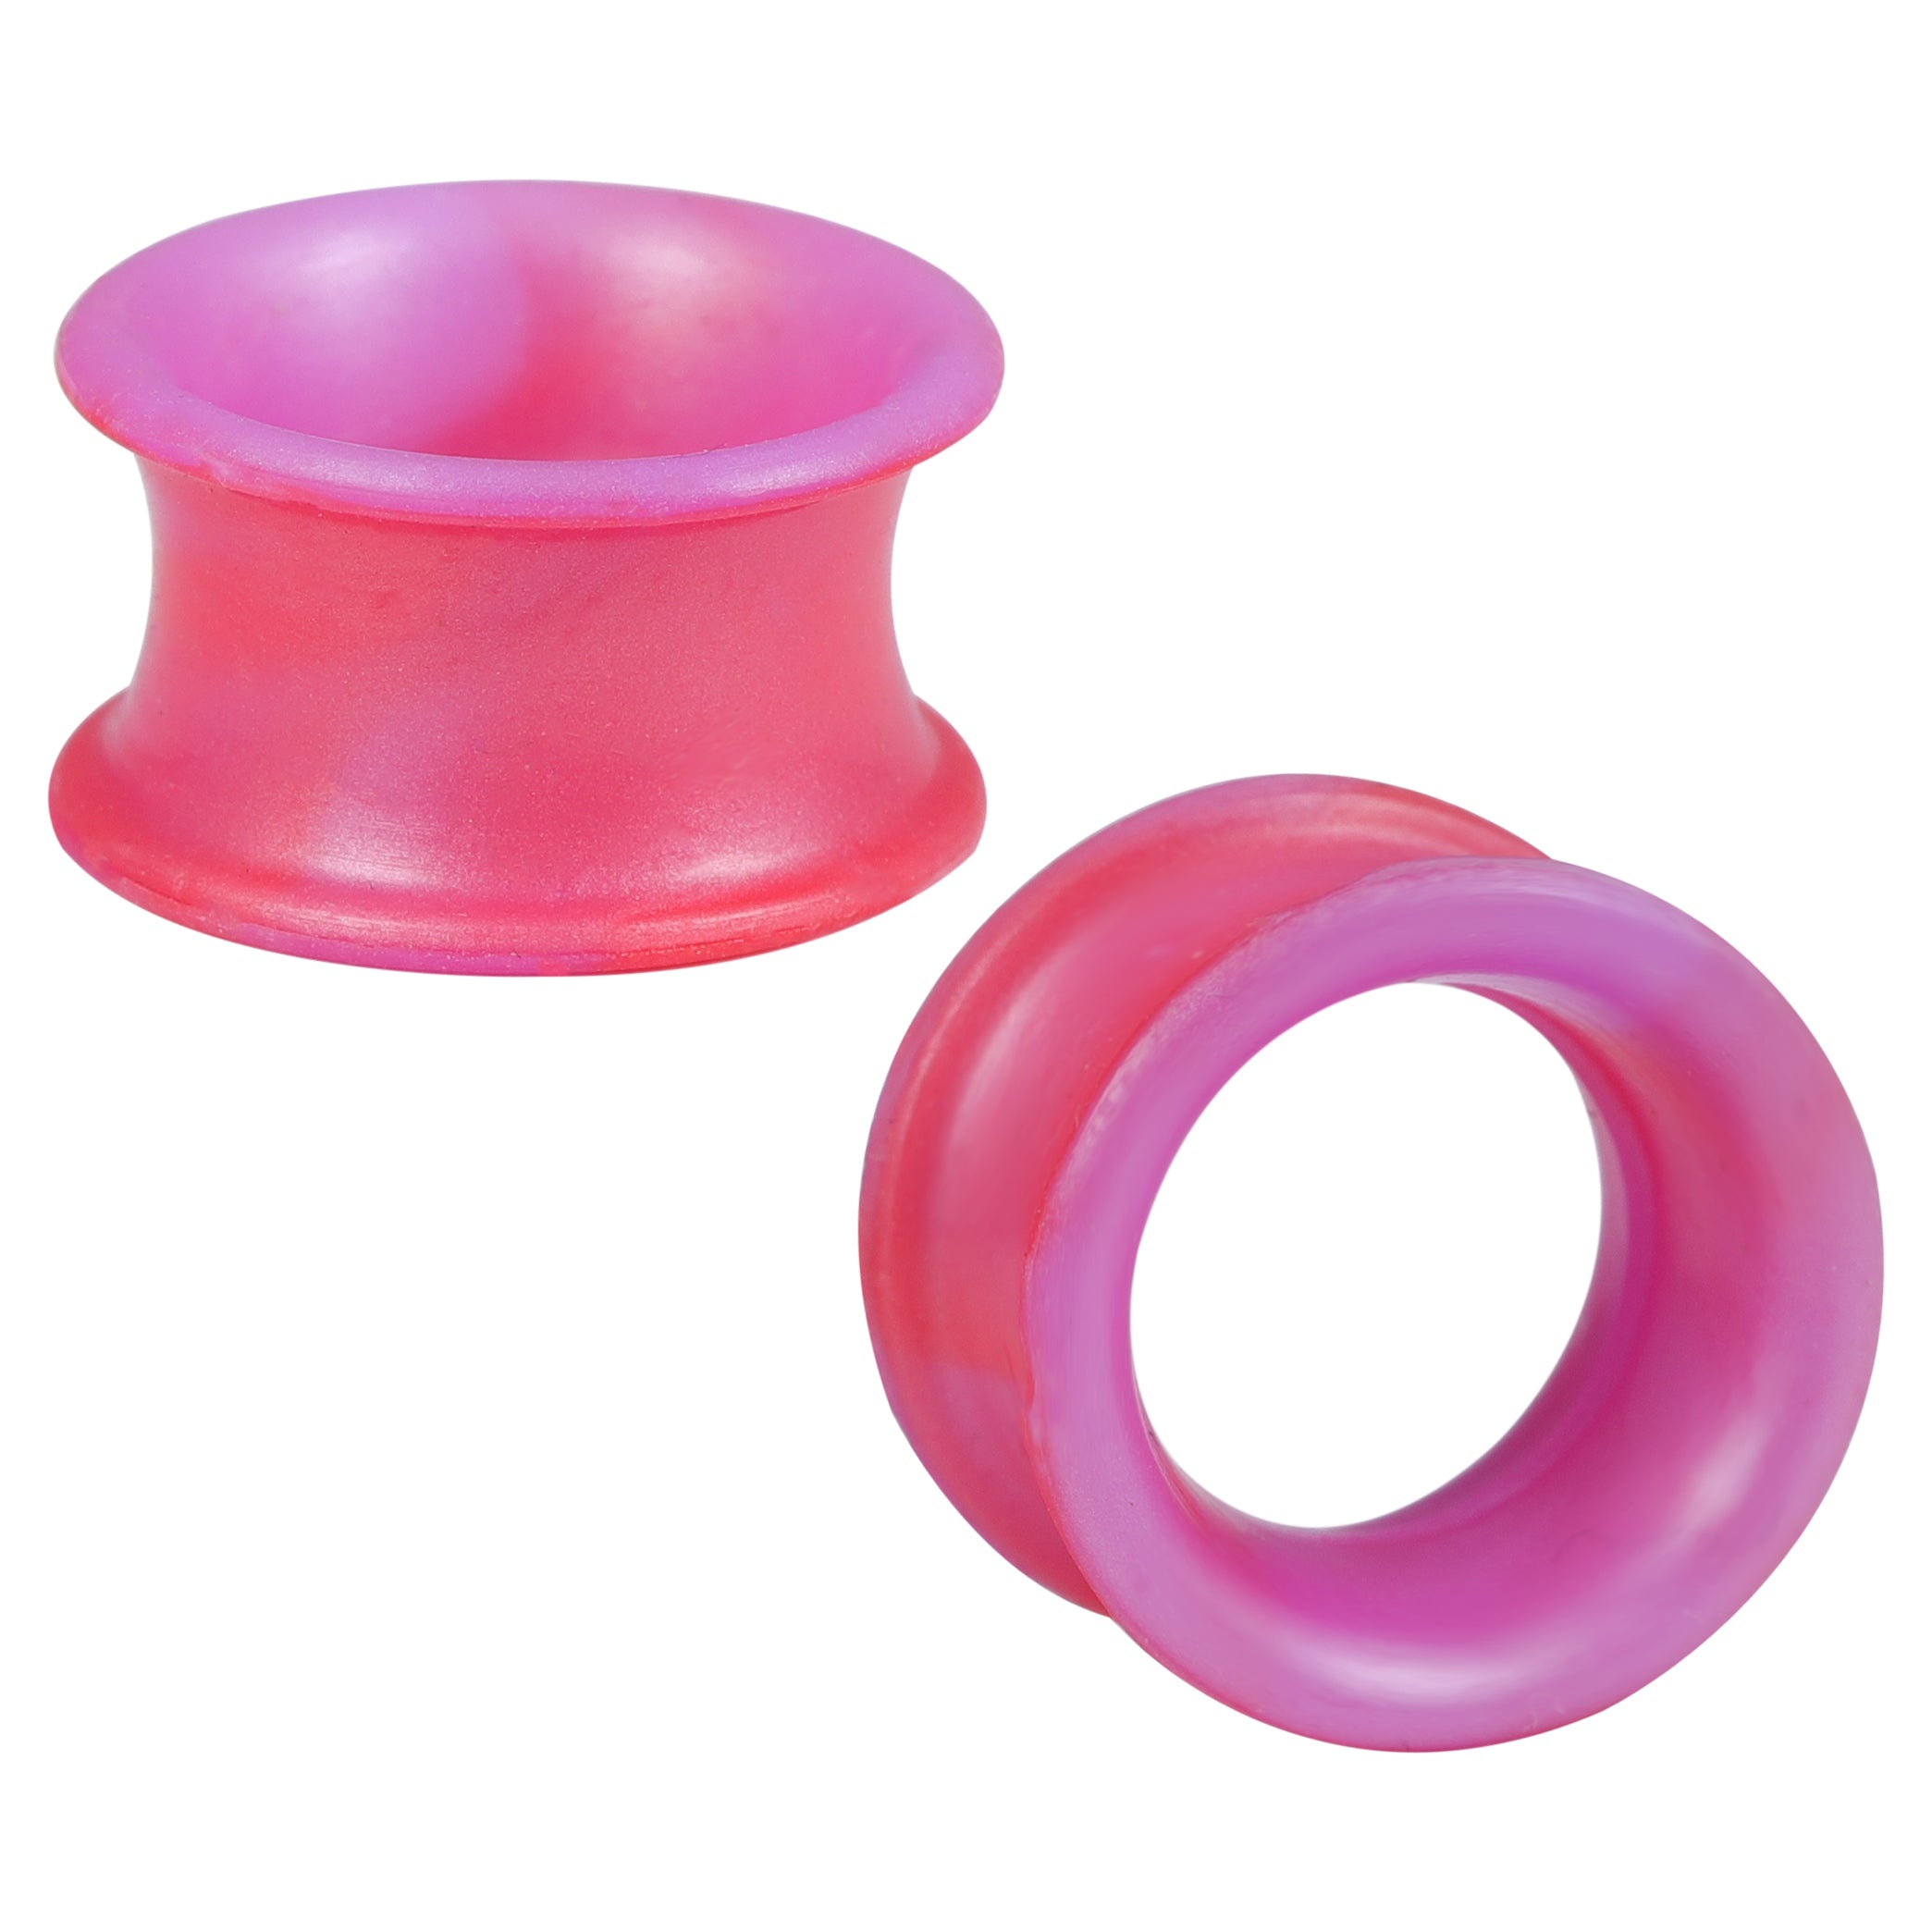 5-22mm-Thin-Silicone-Flexible-Red-Purple-Ear-Tunnels-Double-Flared-Expander-Plugs-and-tuunels